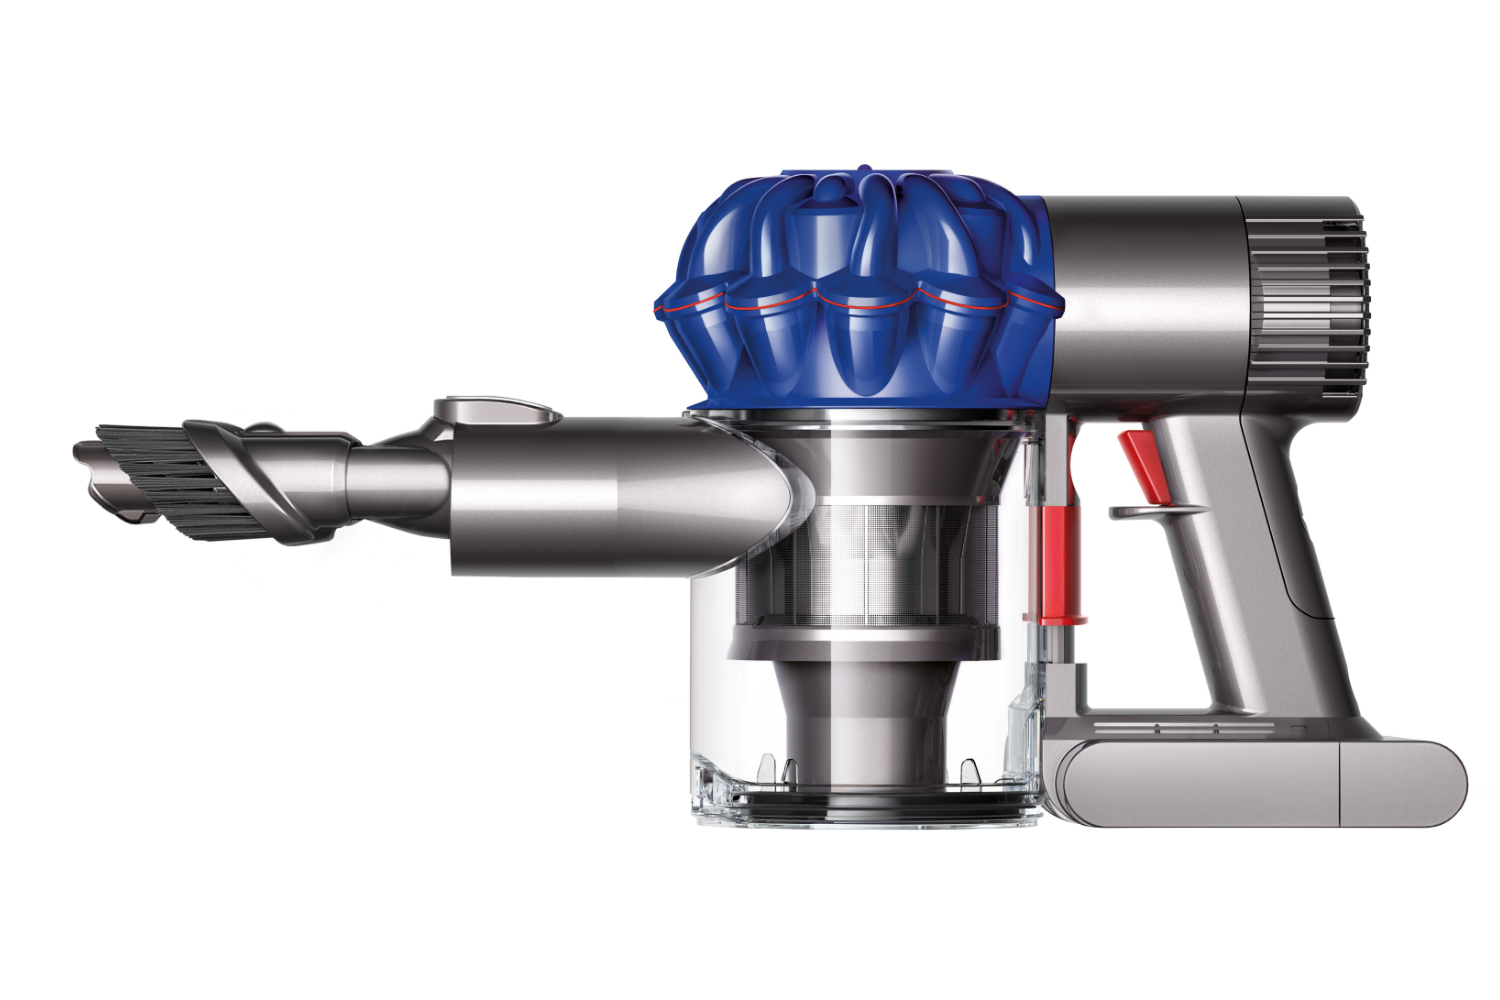 walmart knocks down prices on dyson handheld vacuums in post prime day sale 231942 01 v6 trigger origin vacuum 1